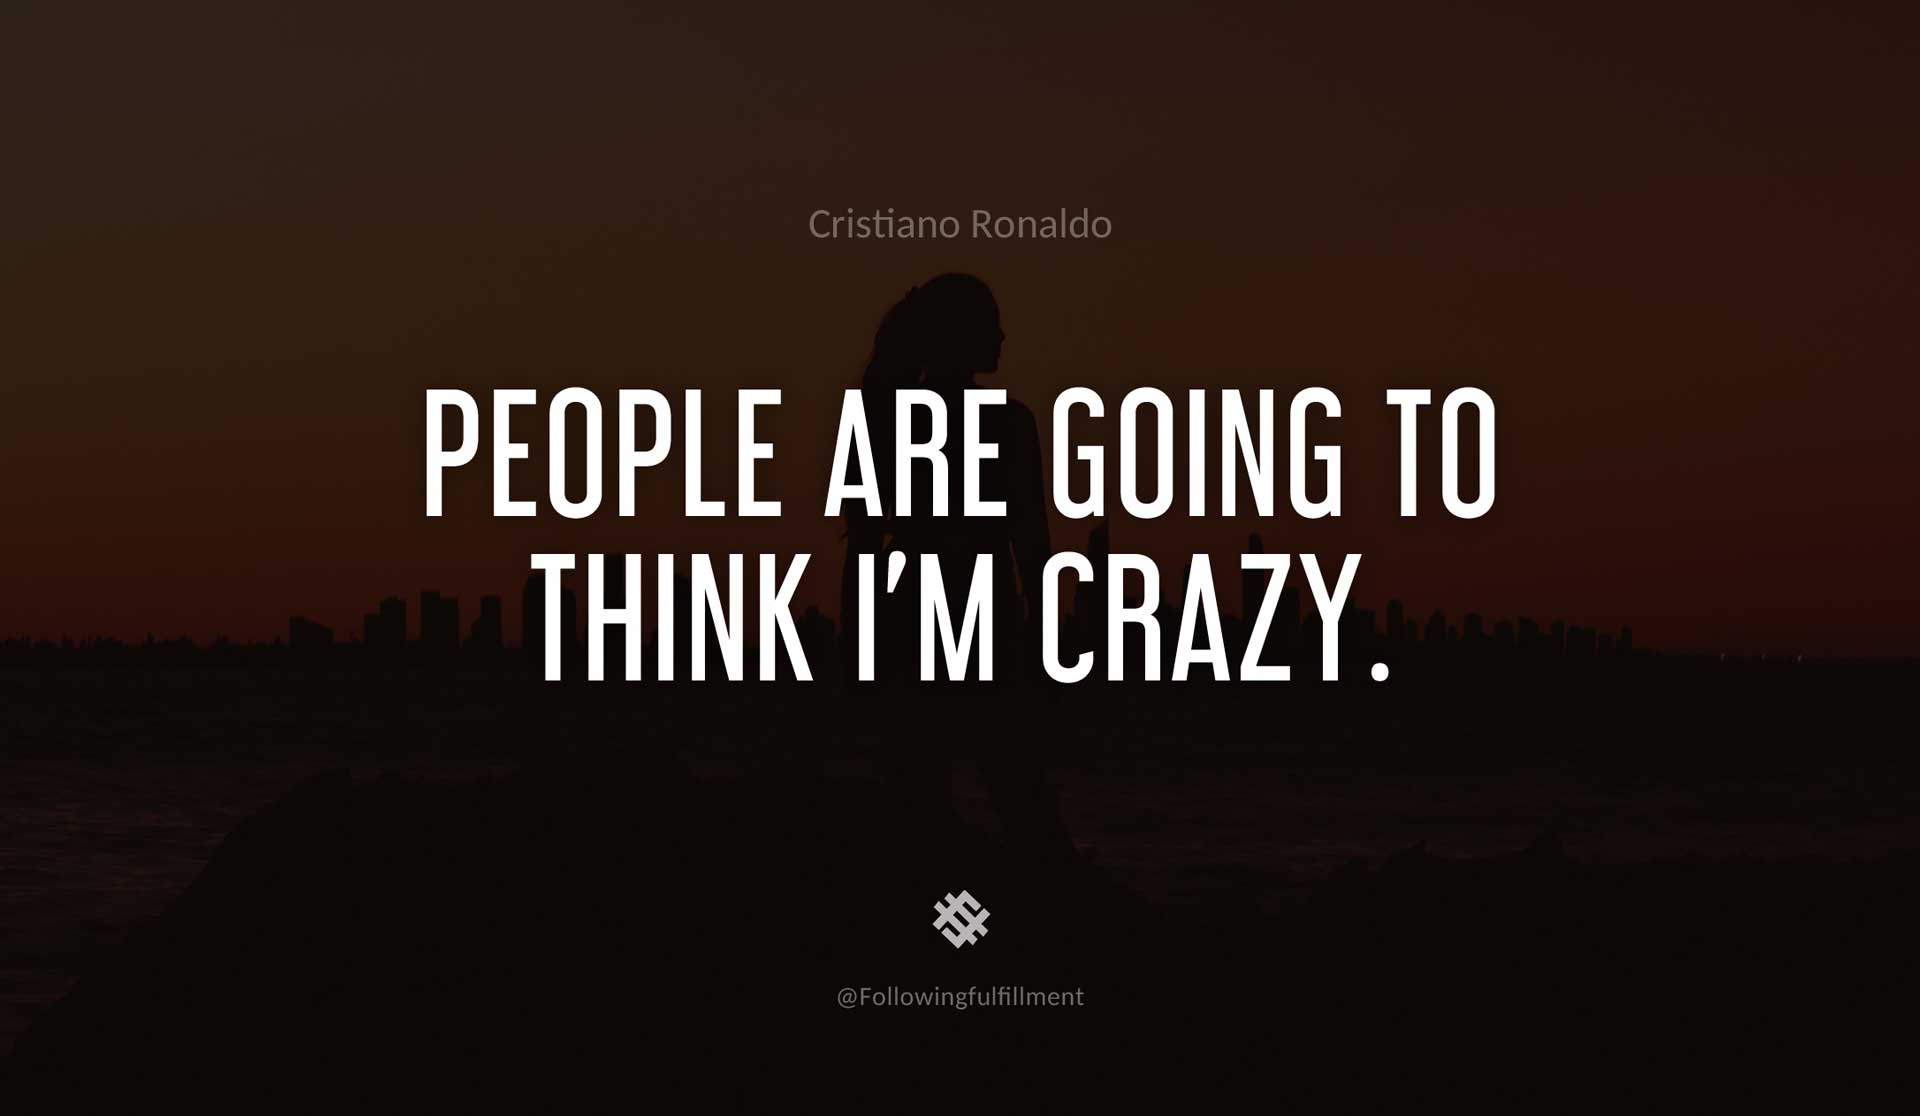 People-are-going-to-think-I'm-crazy.-CRISTIANO-RONALDO-Quote.jpg